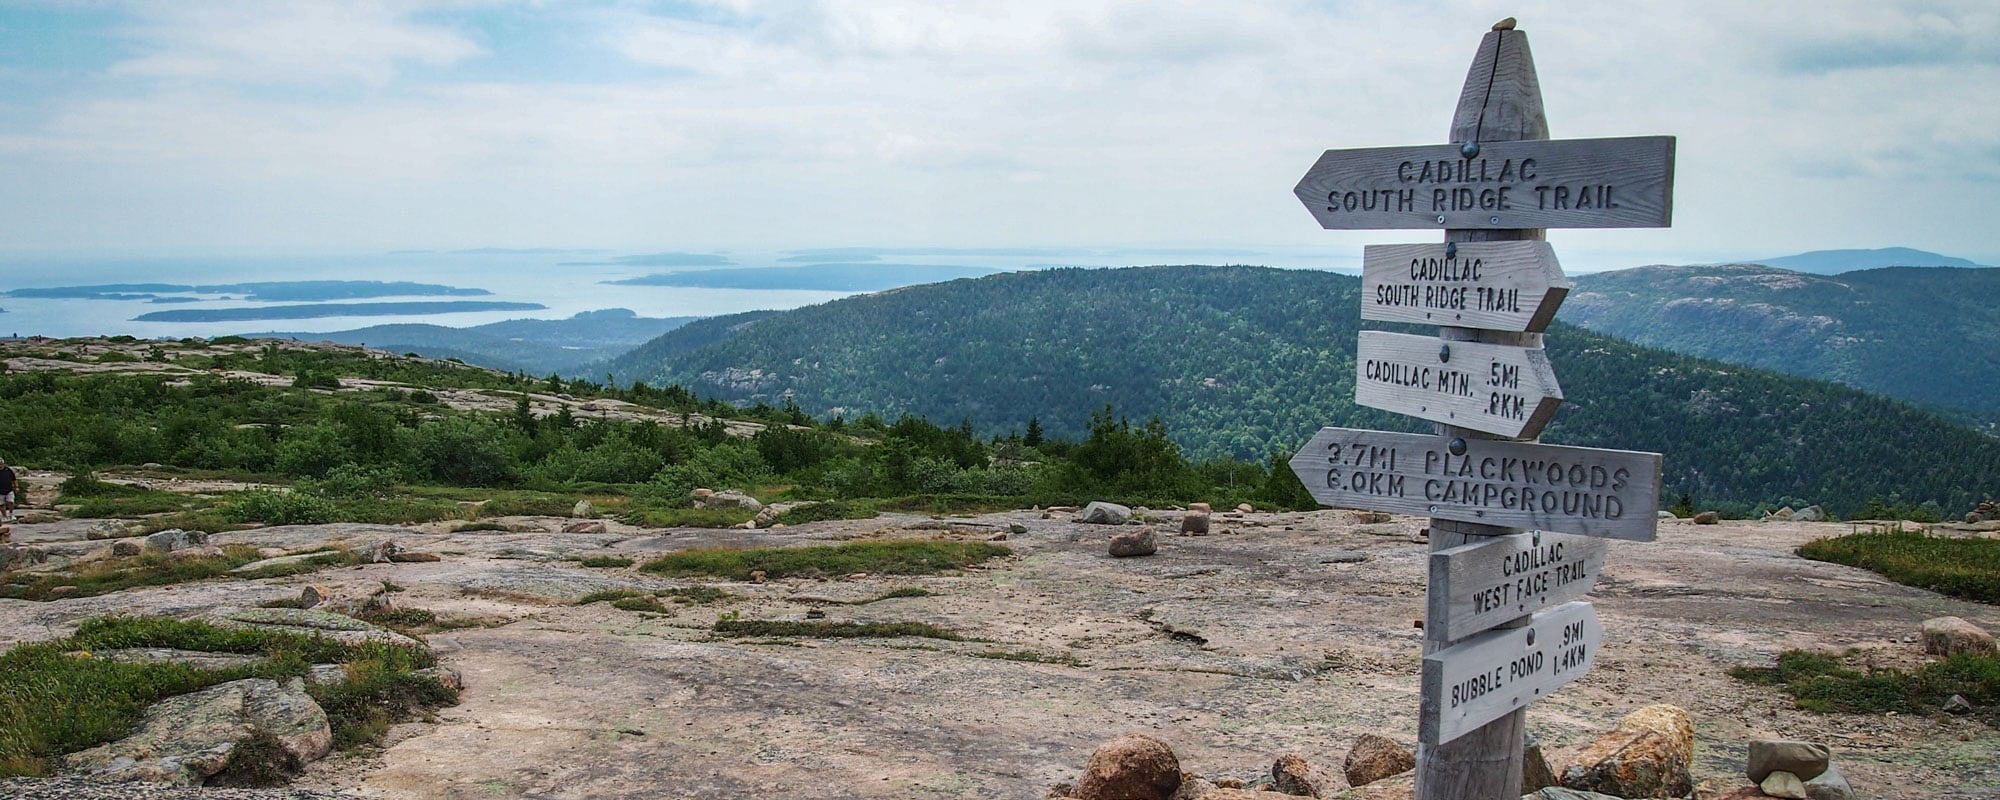 Acadia National Park, Maine - Banner Trail Sign